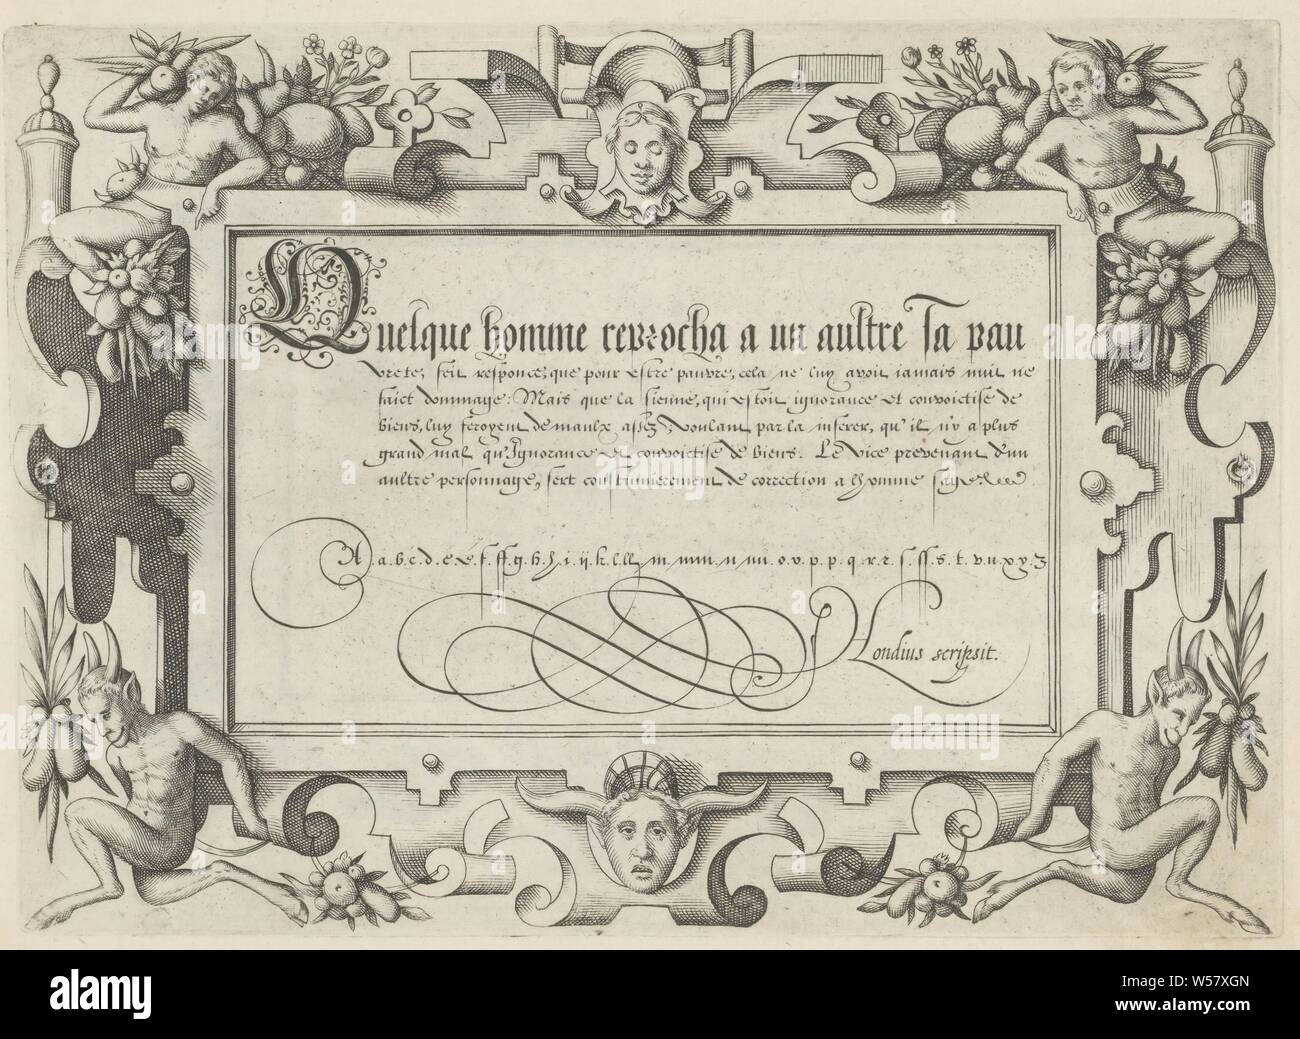 Writing example: Quelque homme reprocha Theatrum artis scribendi (series title), Writing example in a gothic hand with six lines of text in French. At the bottom a lower case alphabet in the relevant hand. The example is contained in a rolling cart cartouche with two saters at the bottom. The print is part of an album, calligraphy, ornament, cartouche, scrollwork, strapwork, birds, fruits and vegetables, mask, mascaron, Jodocus Hondius (I) (mentioned on object), Amsterdam, 1614, paper, engraving, h 160 mm × w 220 mm Stock Photo